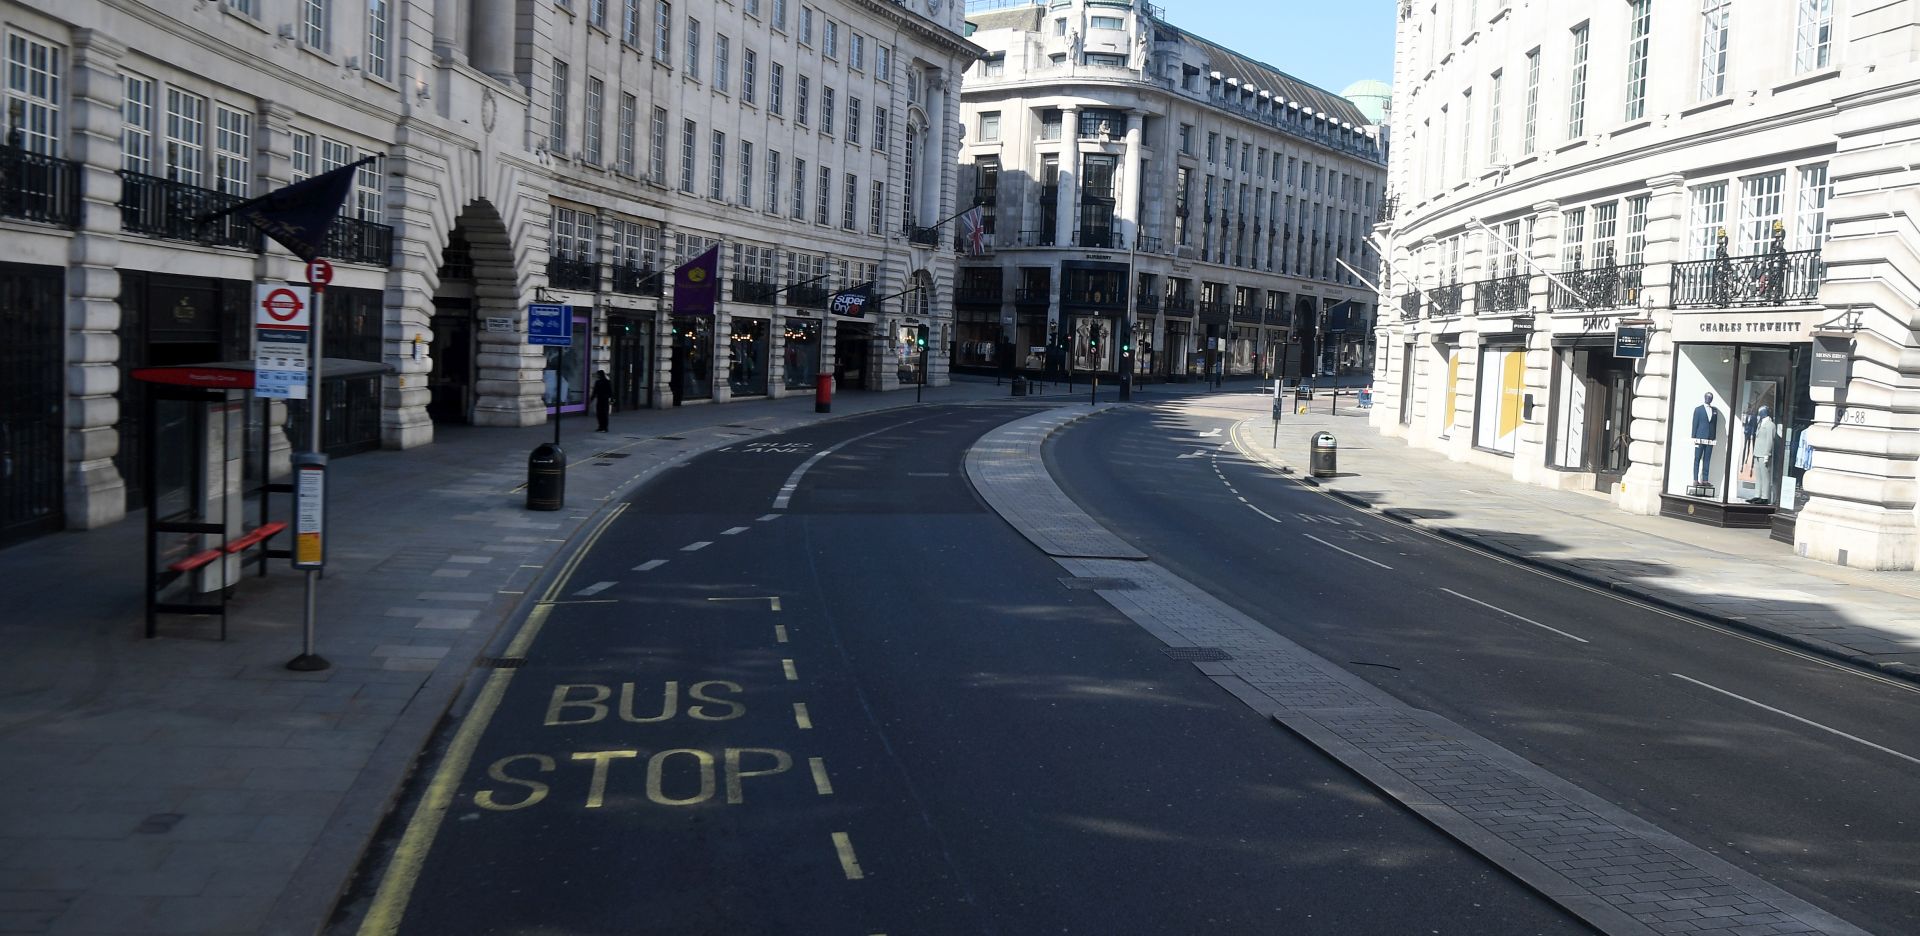 epa08324376 A deserted Regent Street in London, Britain, 26 March 2020. According to news reports the NHS is anticipating a Coronavirus 'tsunami' as the peak of infarction rates nears. British Prime Minister Boris Johnson has announced that Britons can only leave their homes for essential reasons or may be fined, in order to reduce the spread of the Coronavirus COVID-19.  EPA/ANDY RAIN